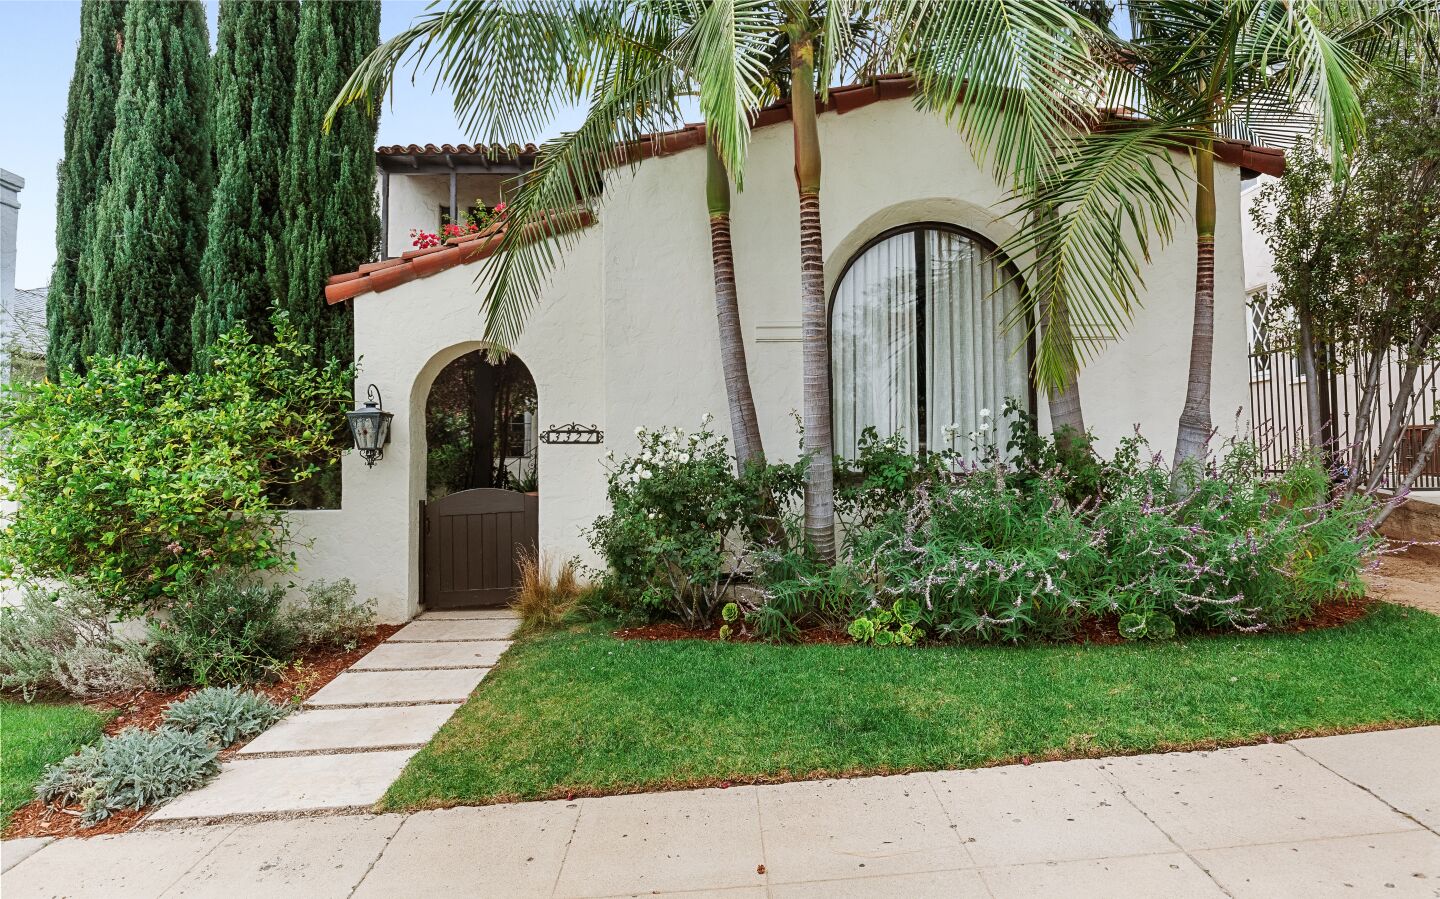 Built in 1932, the designer-done home includes a stylish backyard with a swimming pool and cabana surrounded by vegetable gardens and fruit trees.